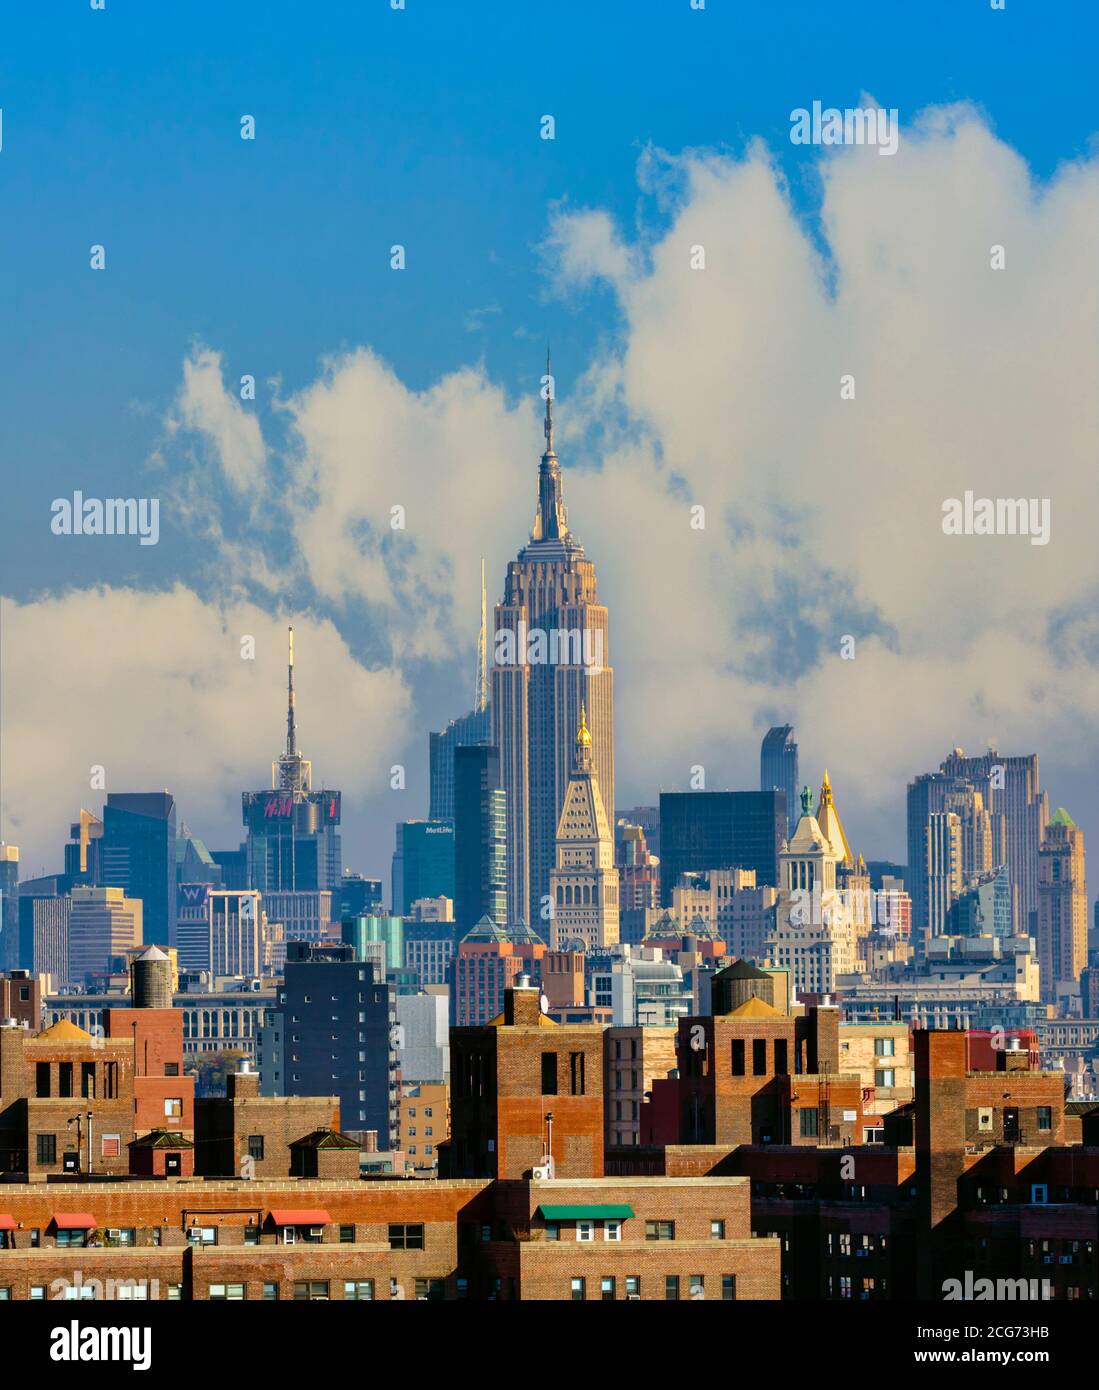 New York, New York State, United States of America.  Manhattan skyline with Empire State building in centre, seen from Brooklyn Bridge. Stock Photo